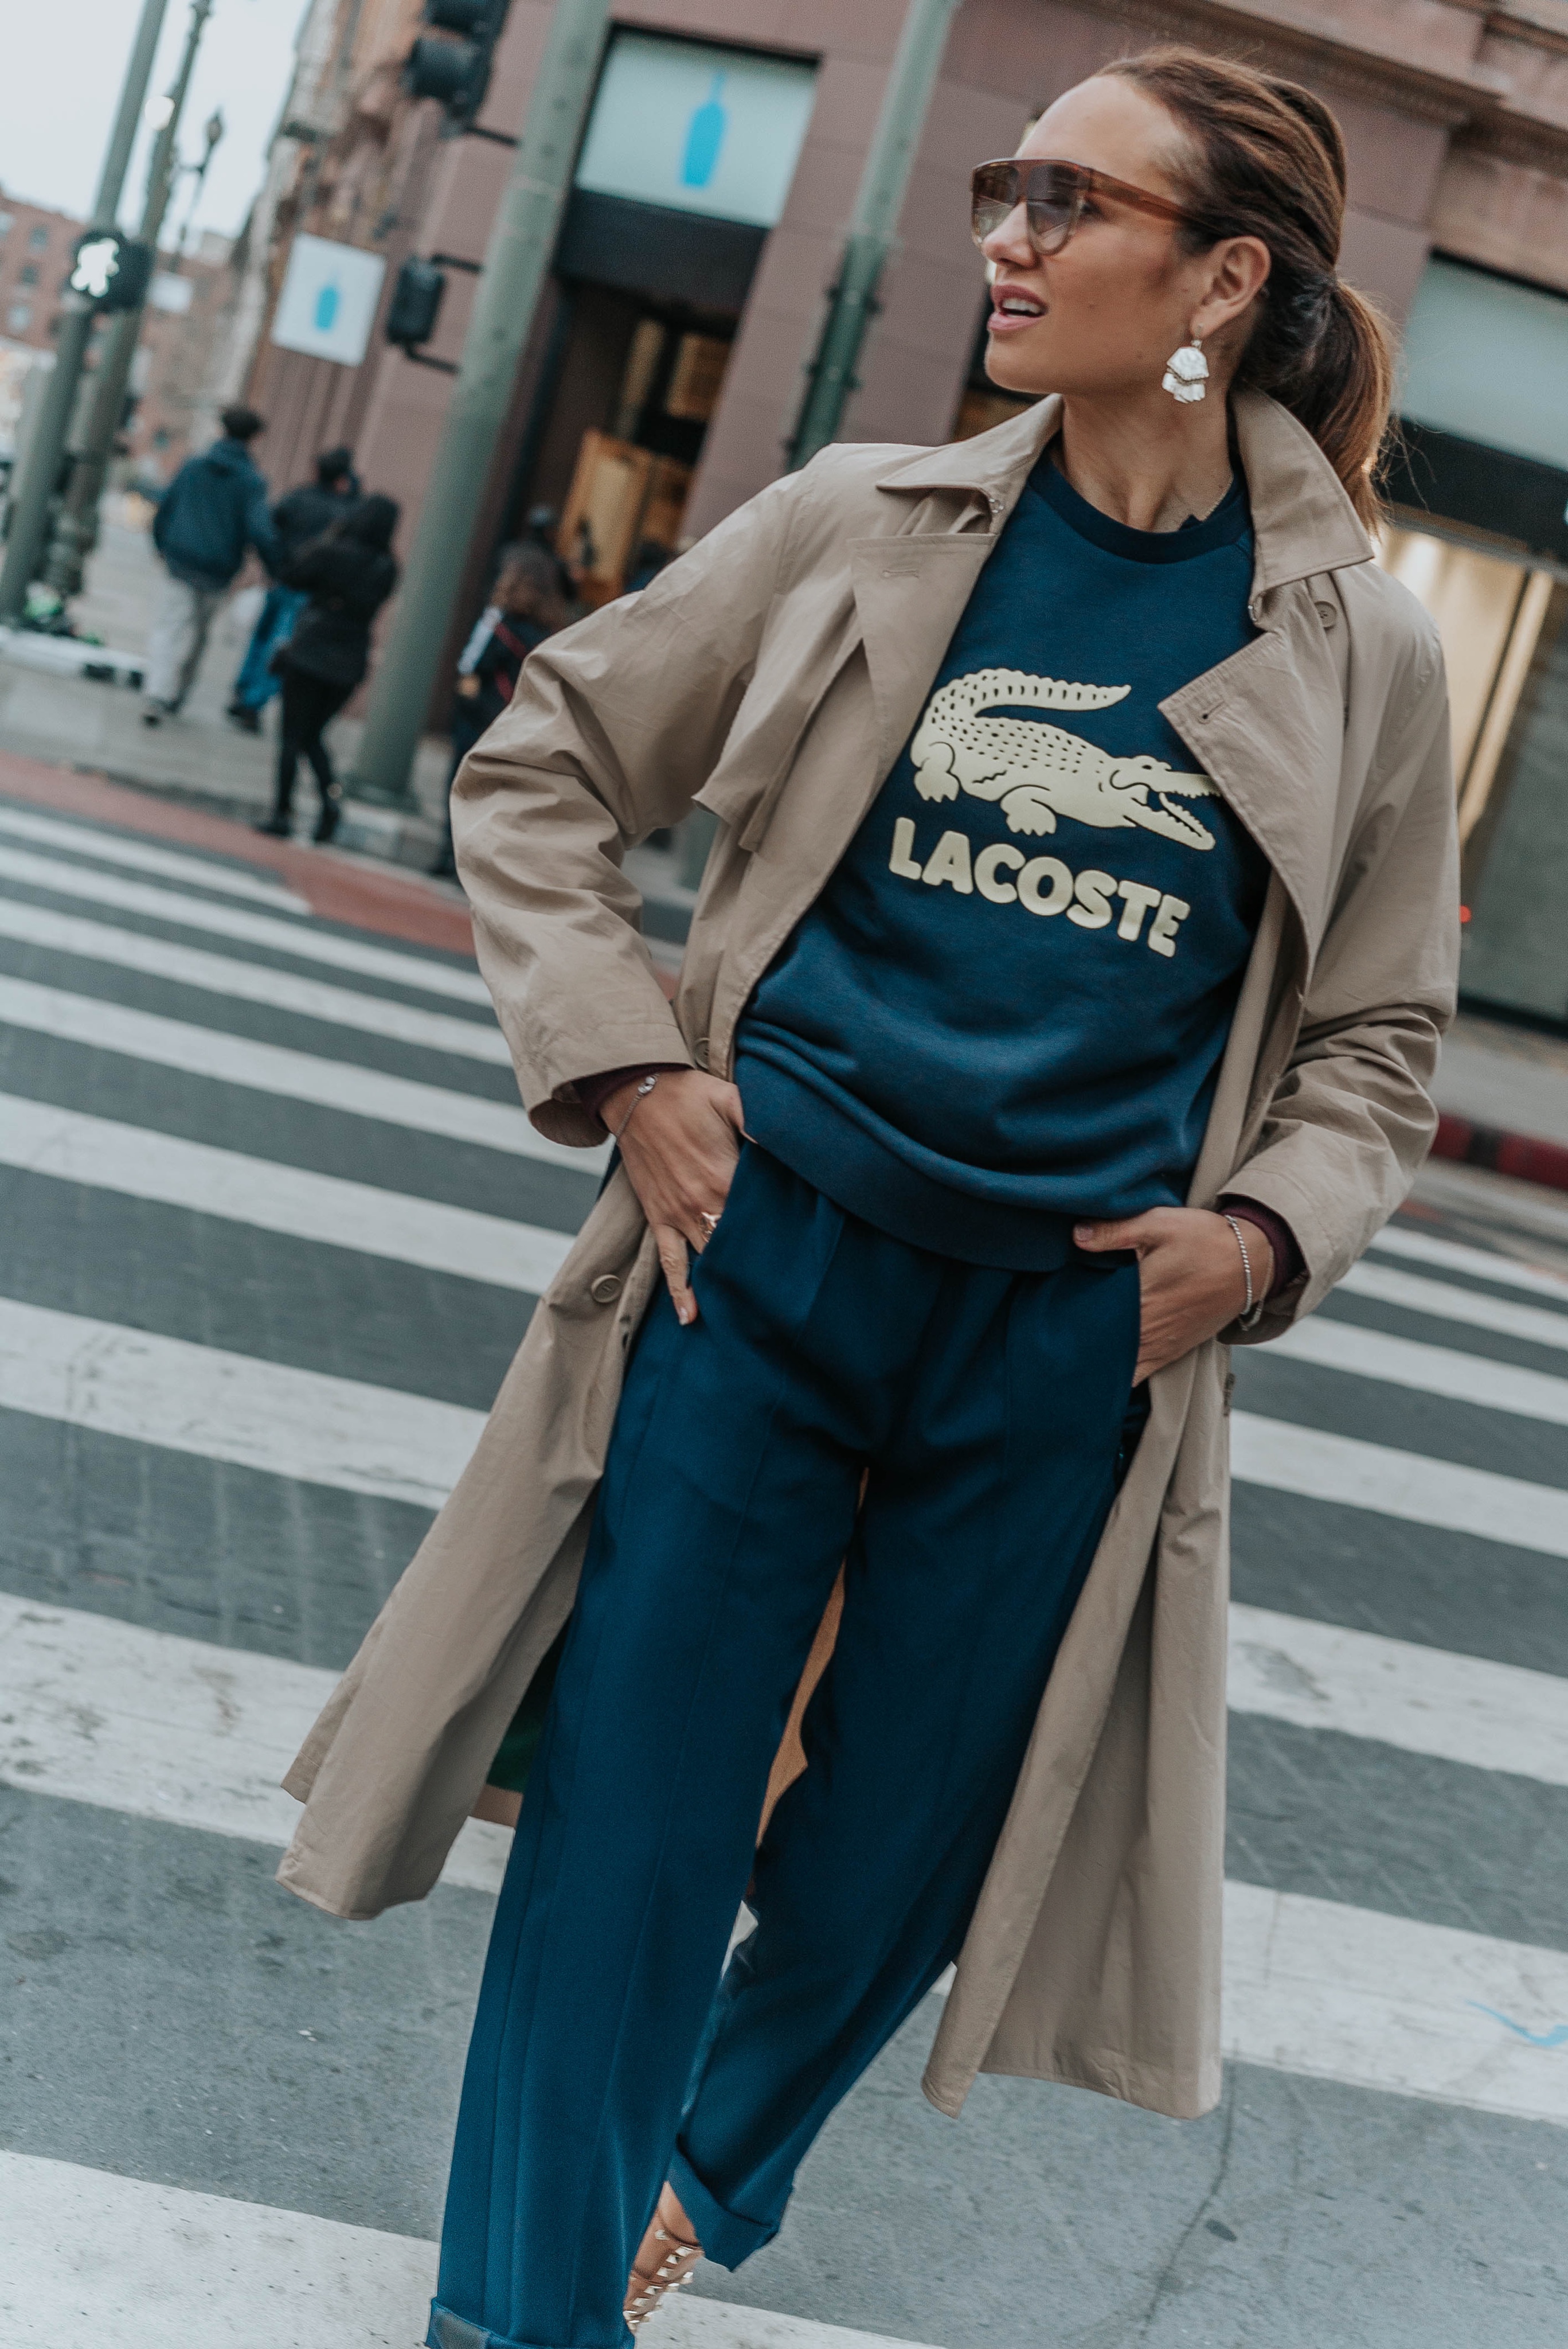 Lacoste Classics I'm wearing for Spring - Shalice